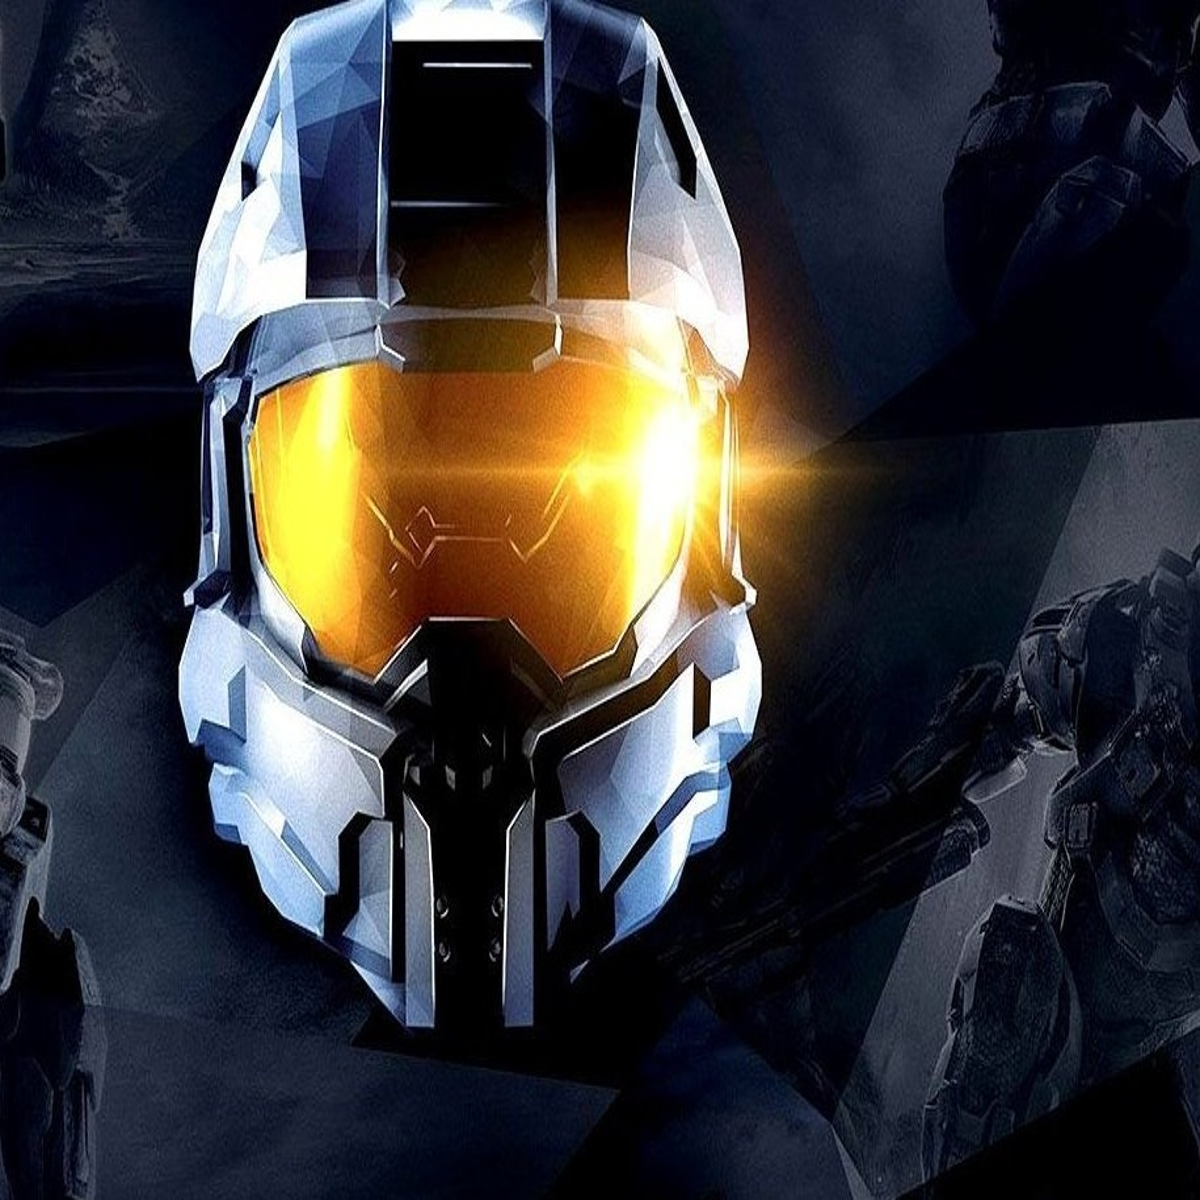 Halo: The Master Chief Collection - All Big Changes from April